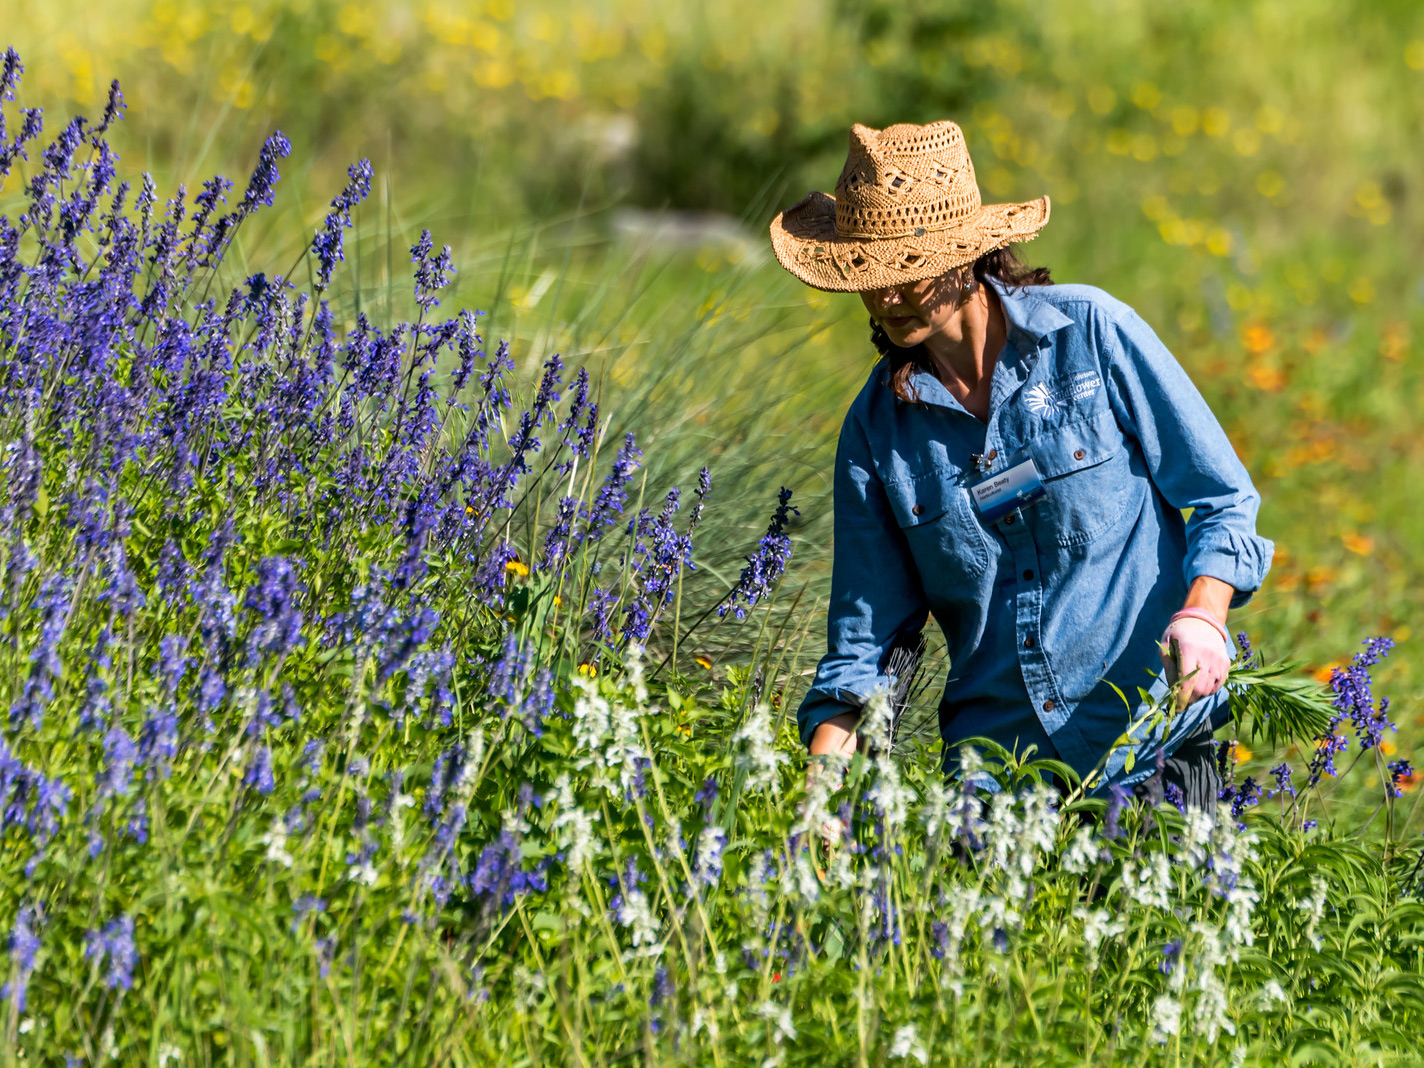 A gardener in a straw hat tends to a field of tall violet and white flowers